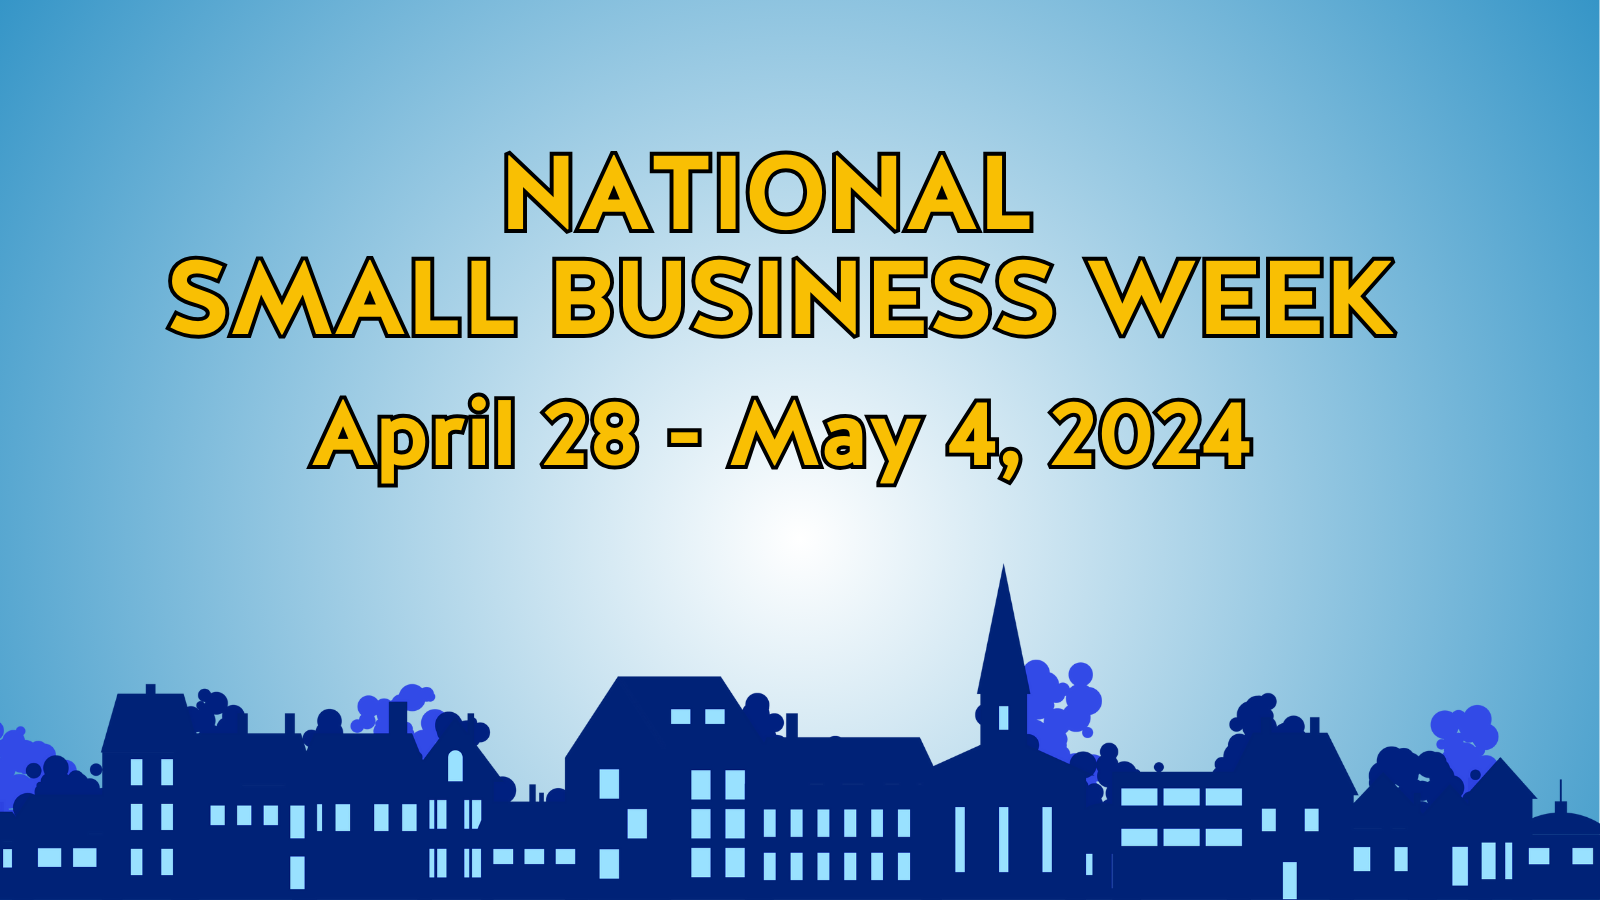 National Small Business Week is April 28-May 4, 2024